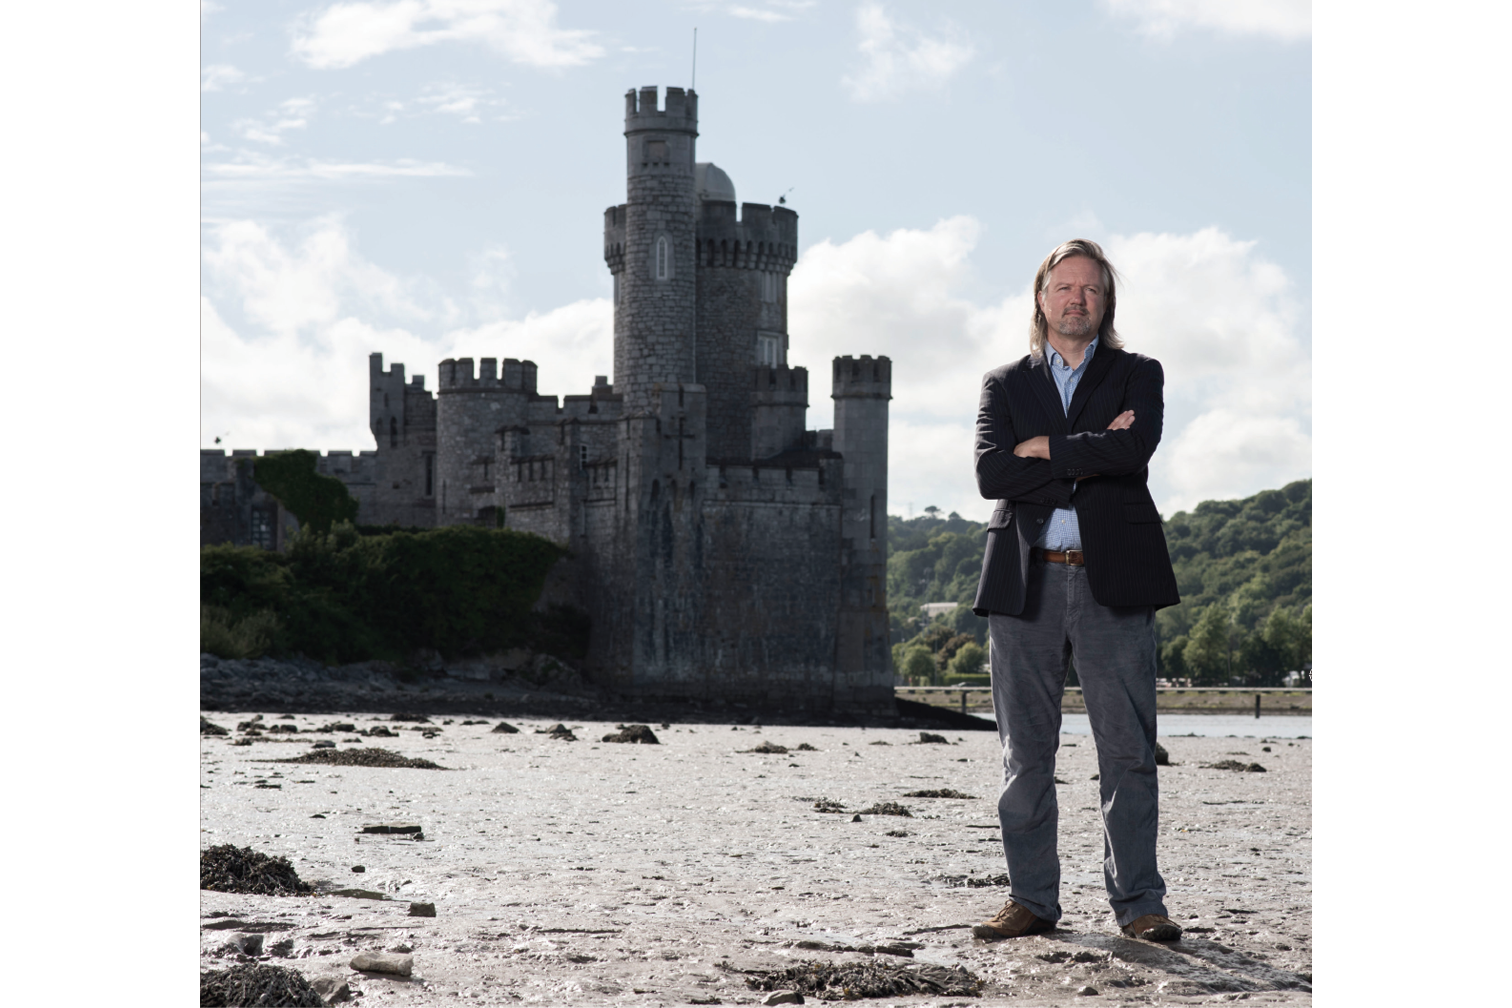 Nicholas Allen, Burns Scholar, Spring 2010, photographed at Blackrock Castle on the banks of the River Lee in County Cork.